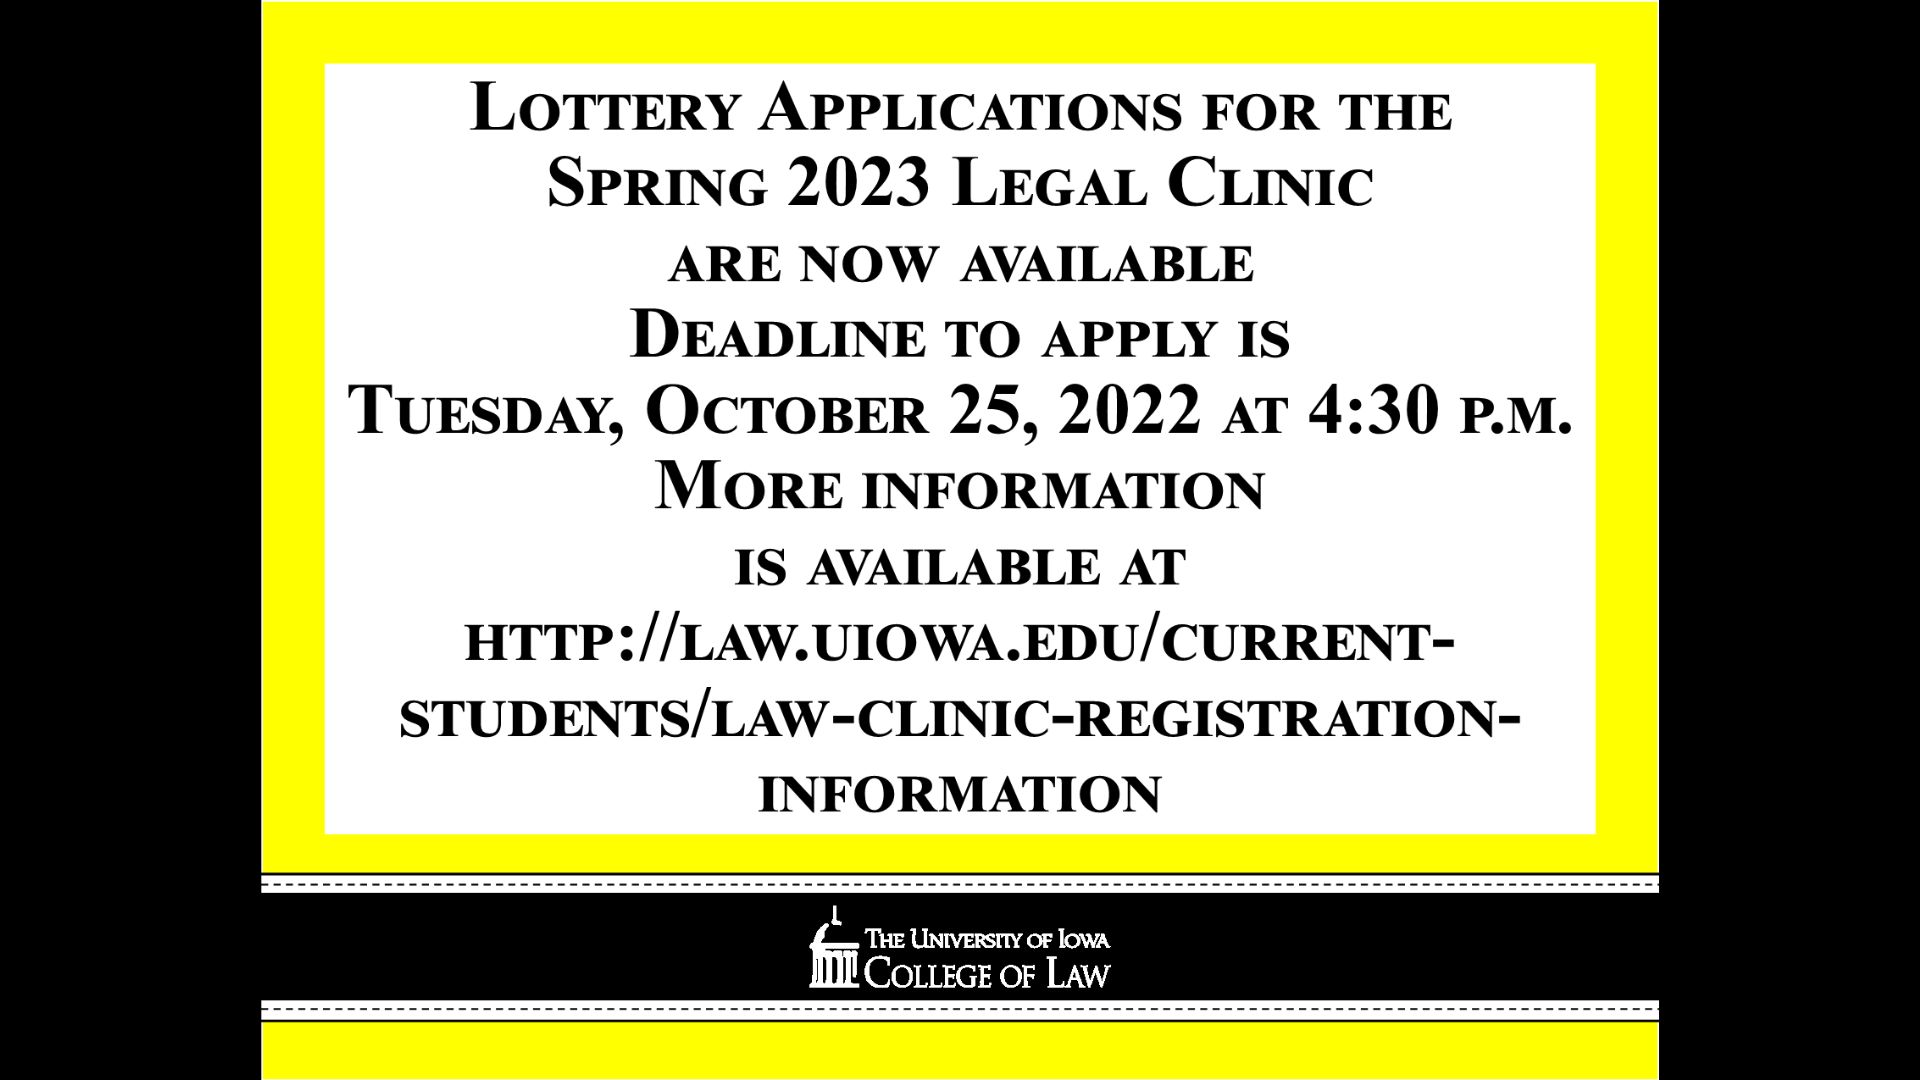  Lottery Applications for the Spring 2023 Legal Clinic are now available    Deadline to apply is Tuesday, October 25, 2022 at 4:30 p.m.    More information is available at    http://law.uiowa.edu/current-students/law-clinic-registration-information